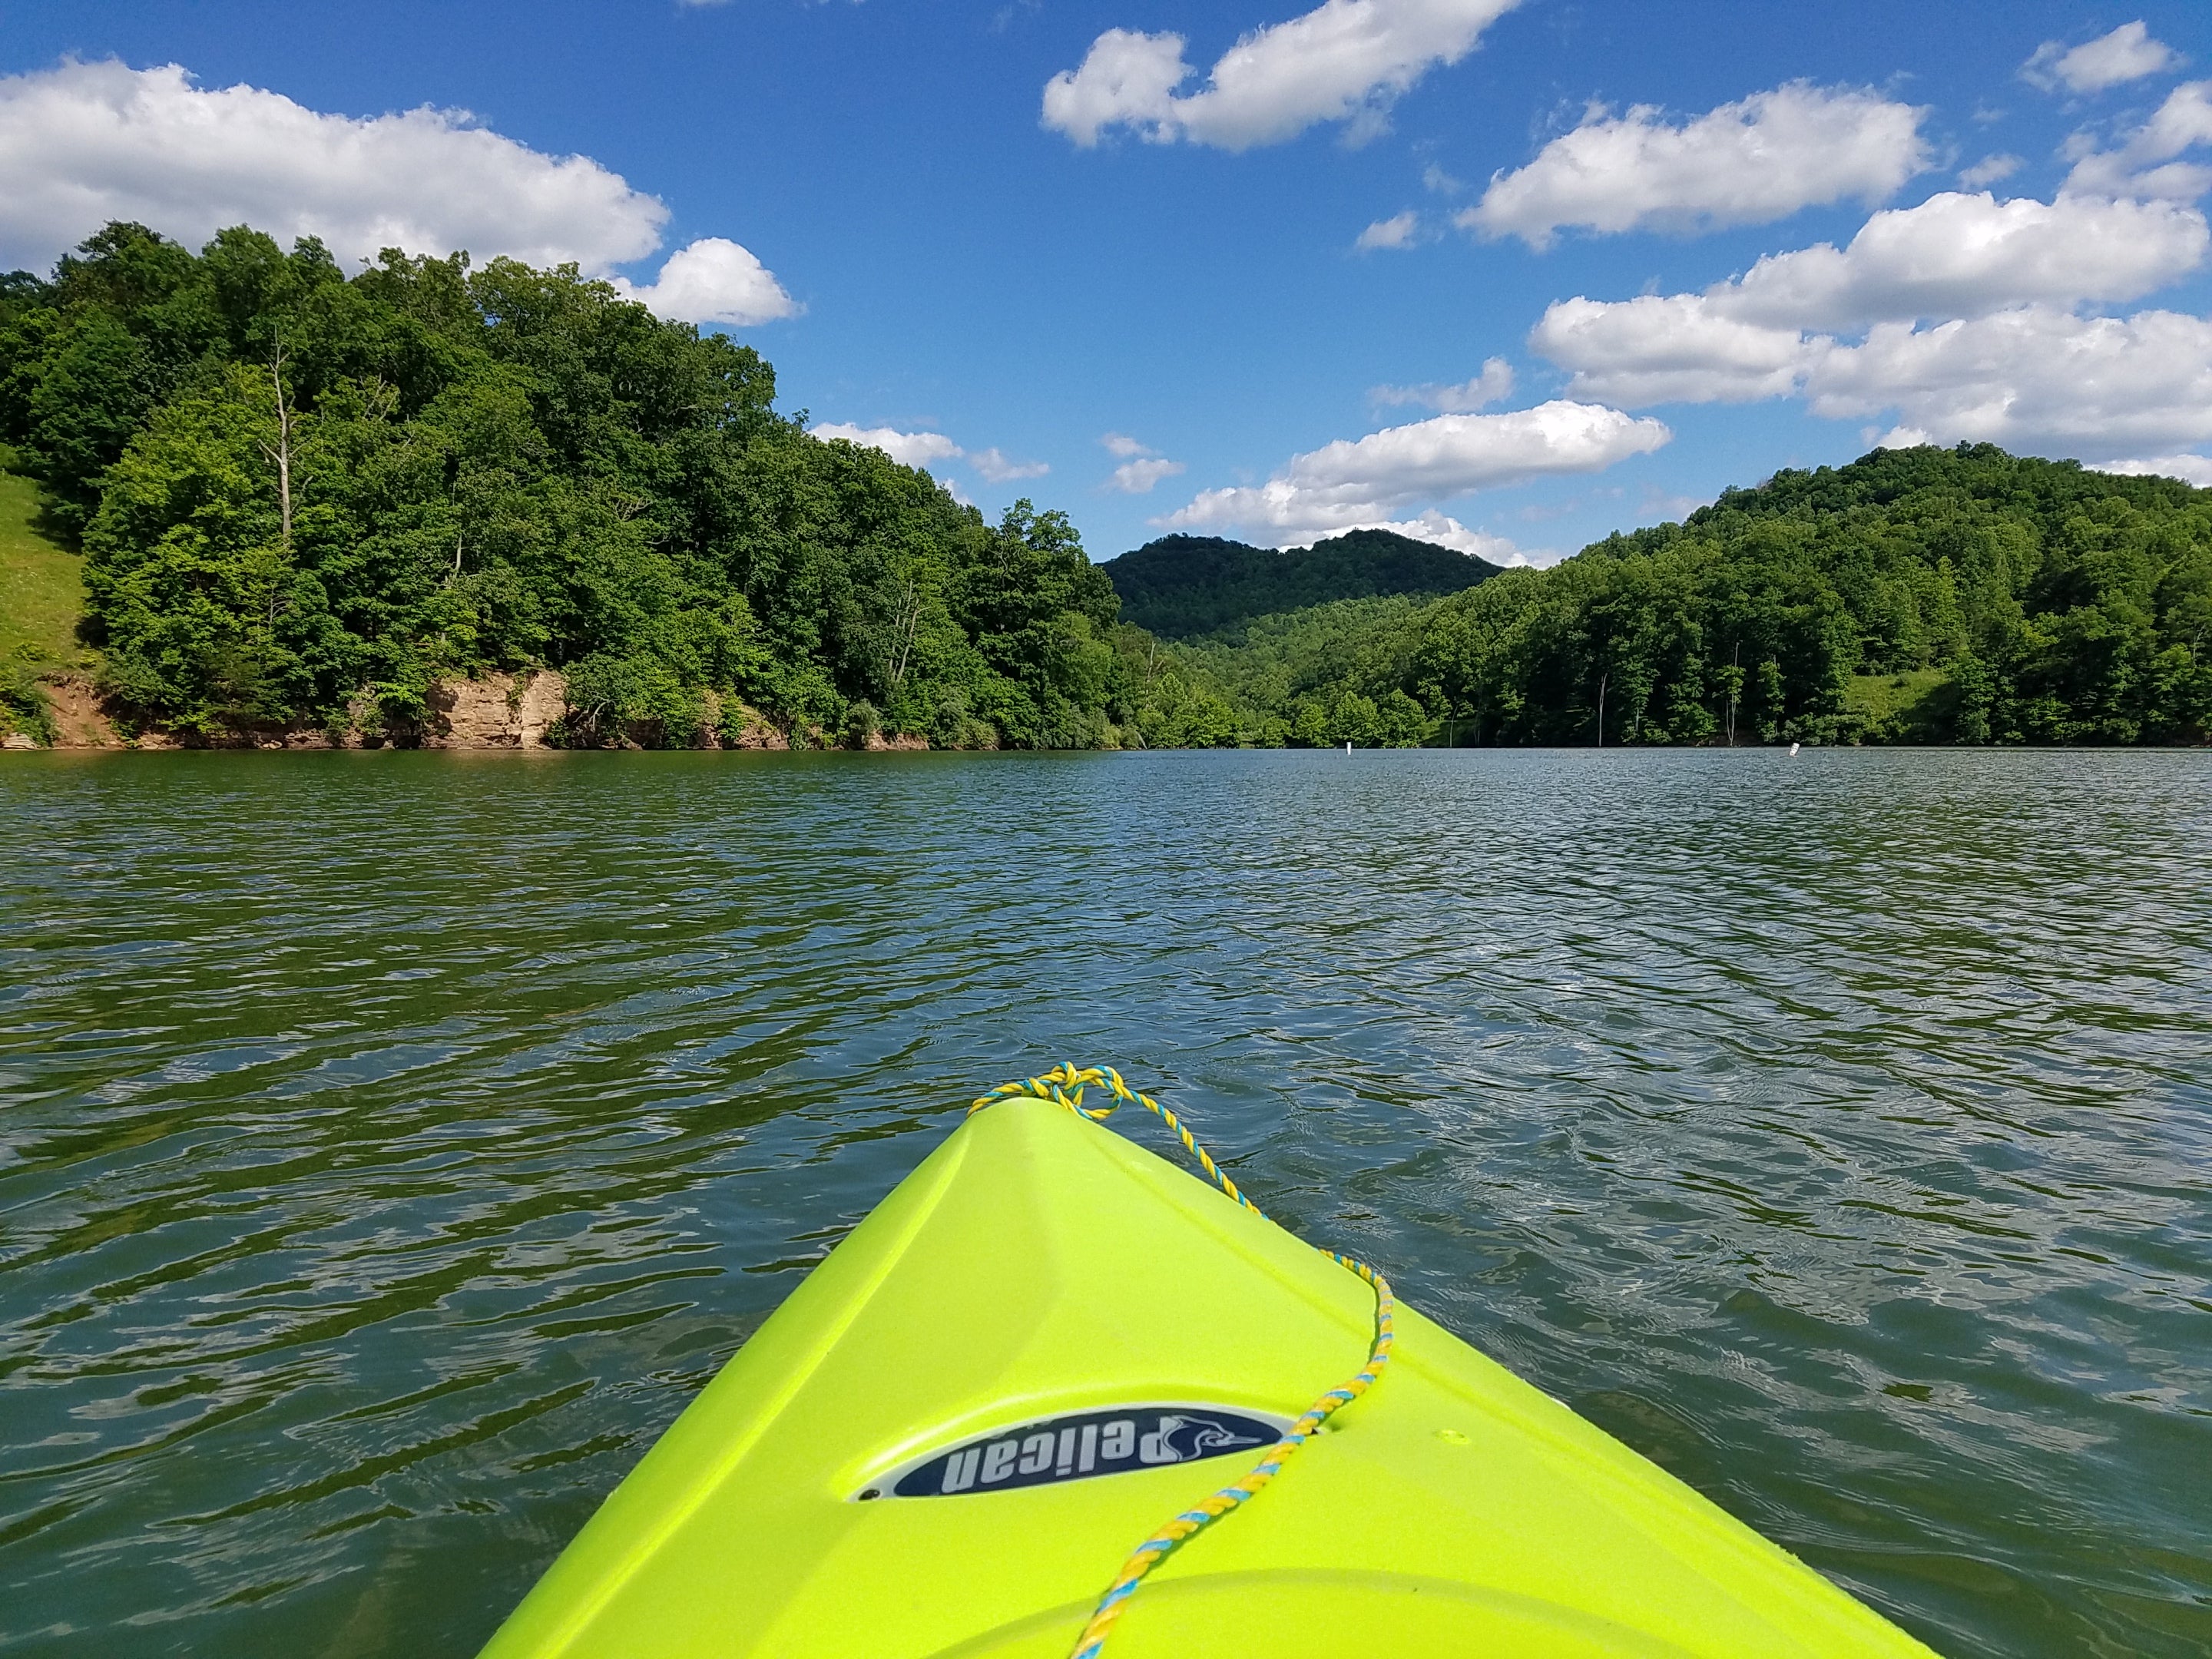 View from the water on Stonewall Jackson Lake.